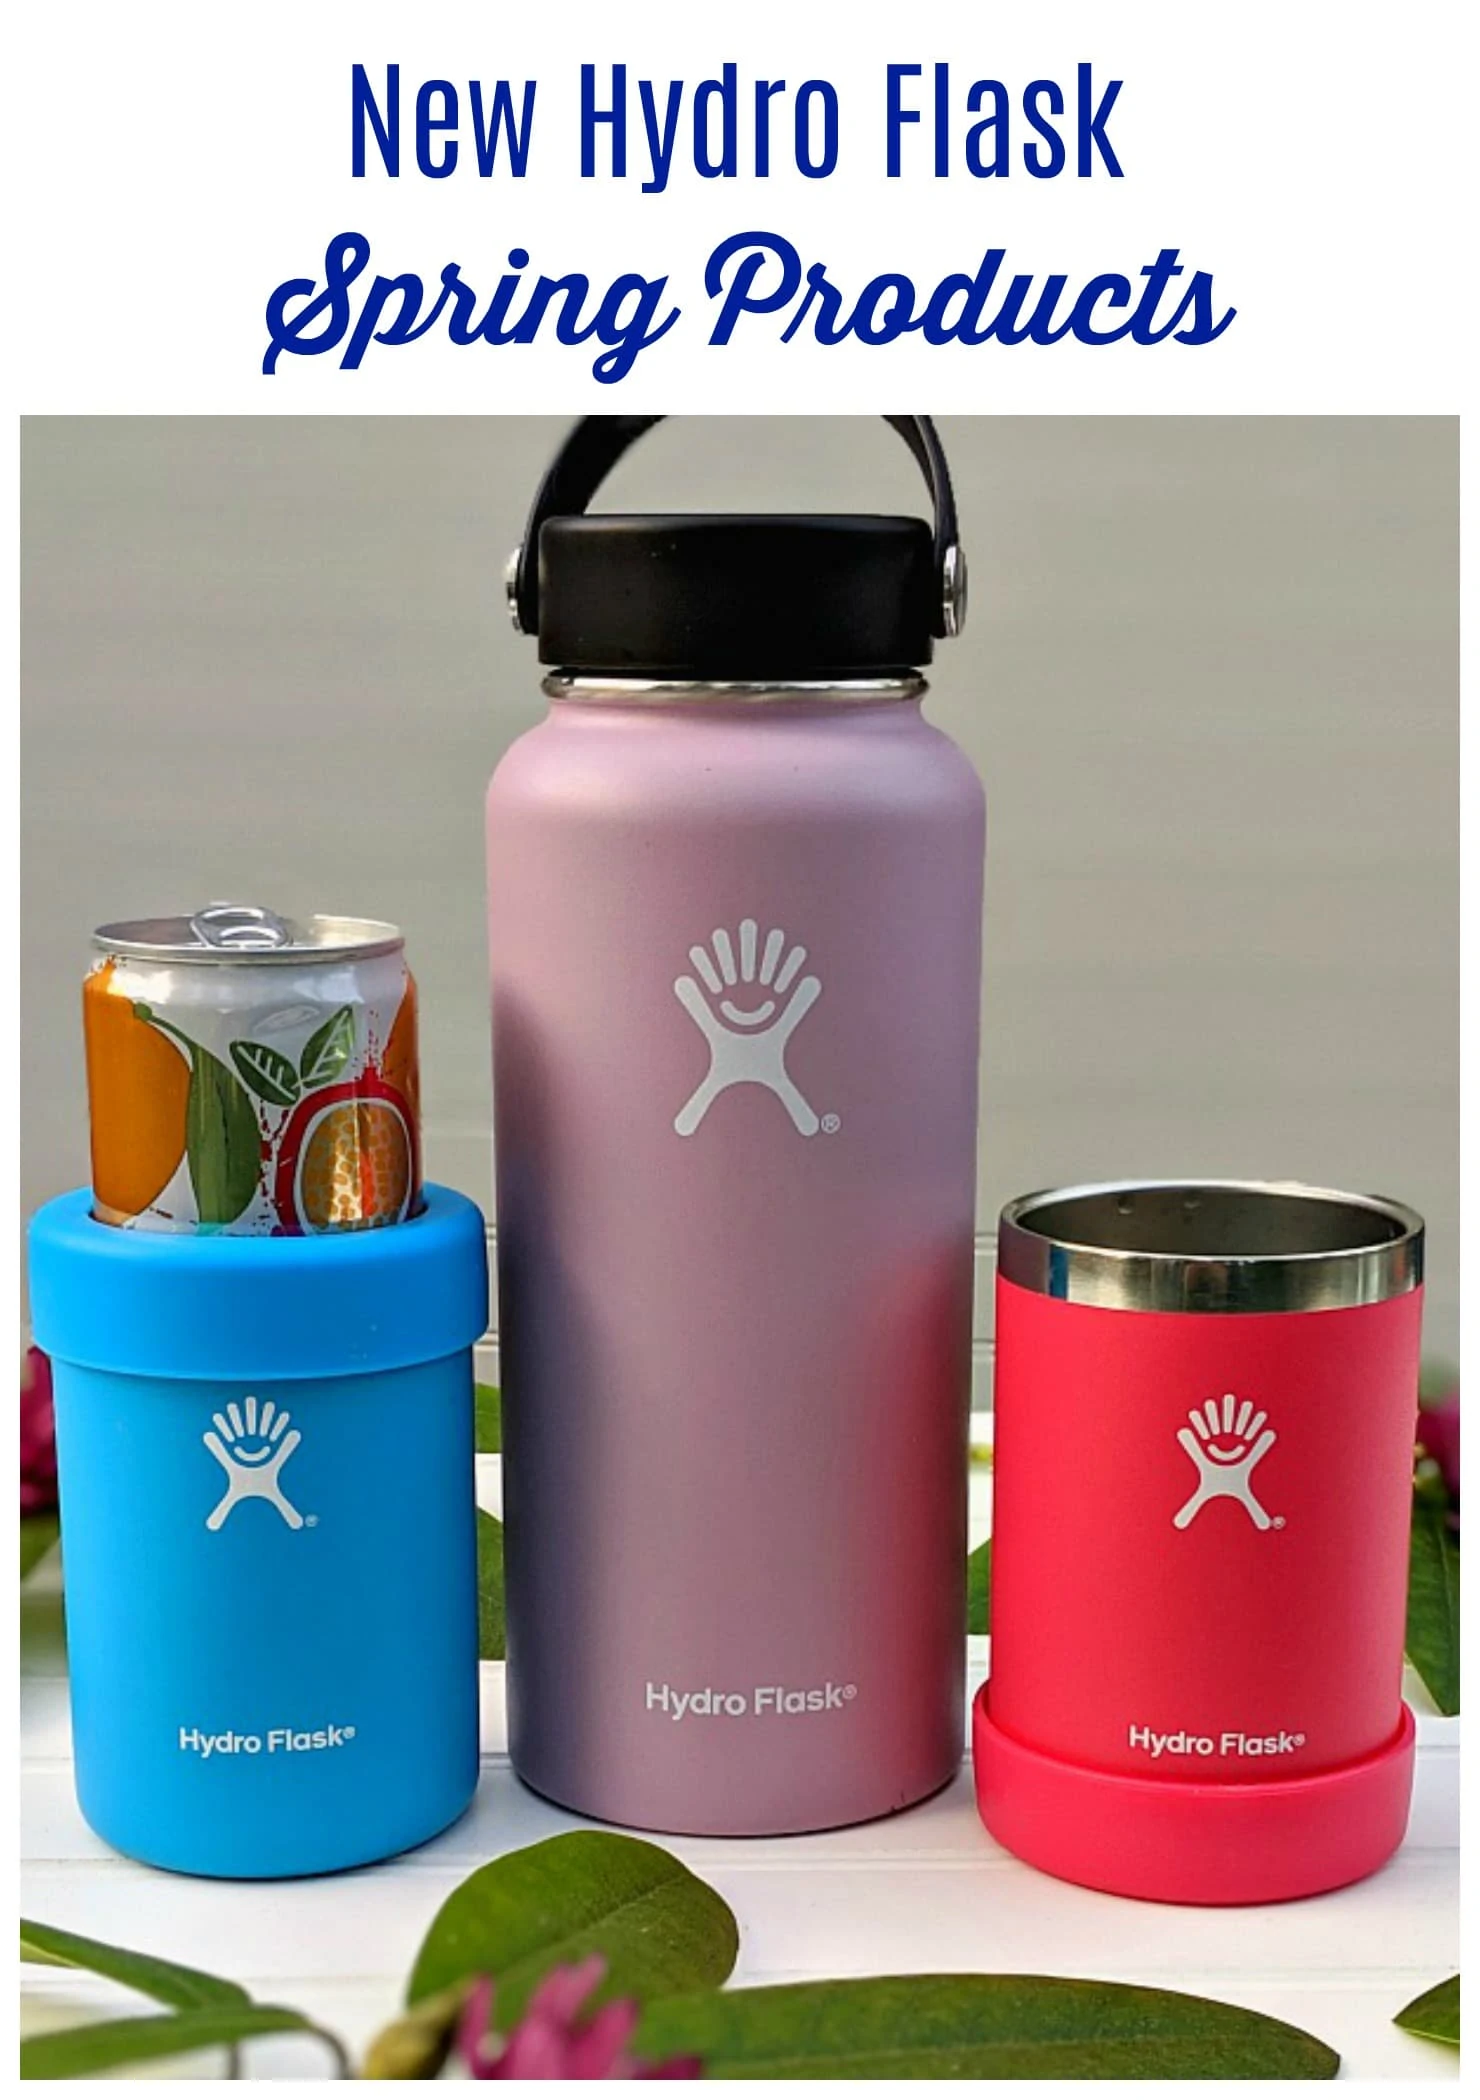 What are hydro flask made of?What coating on hydro flask? How it works?